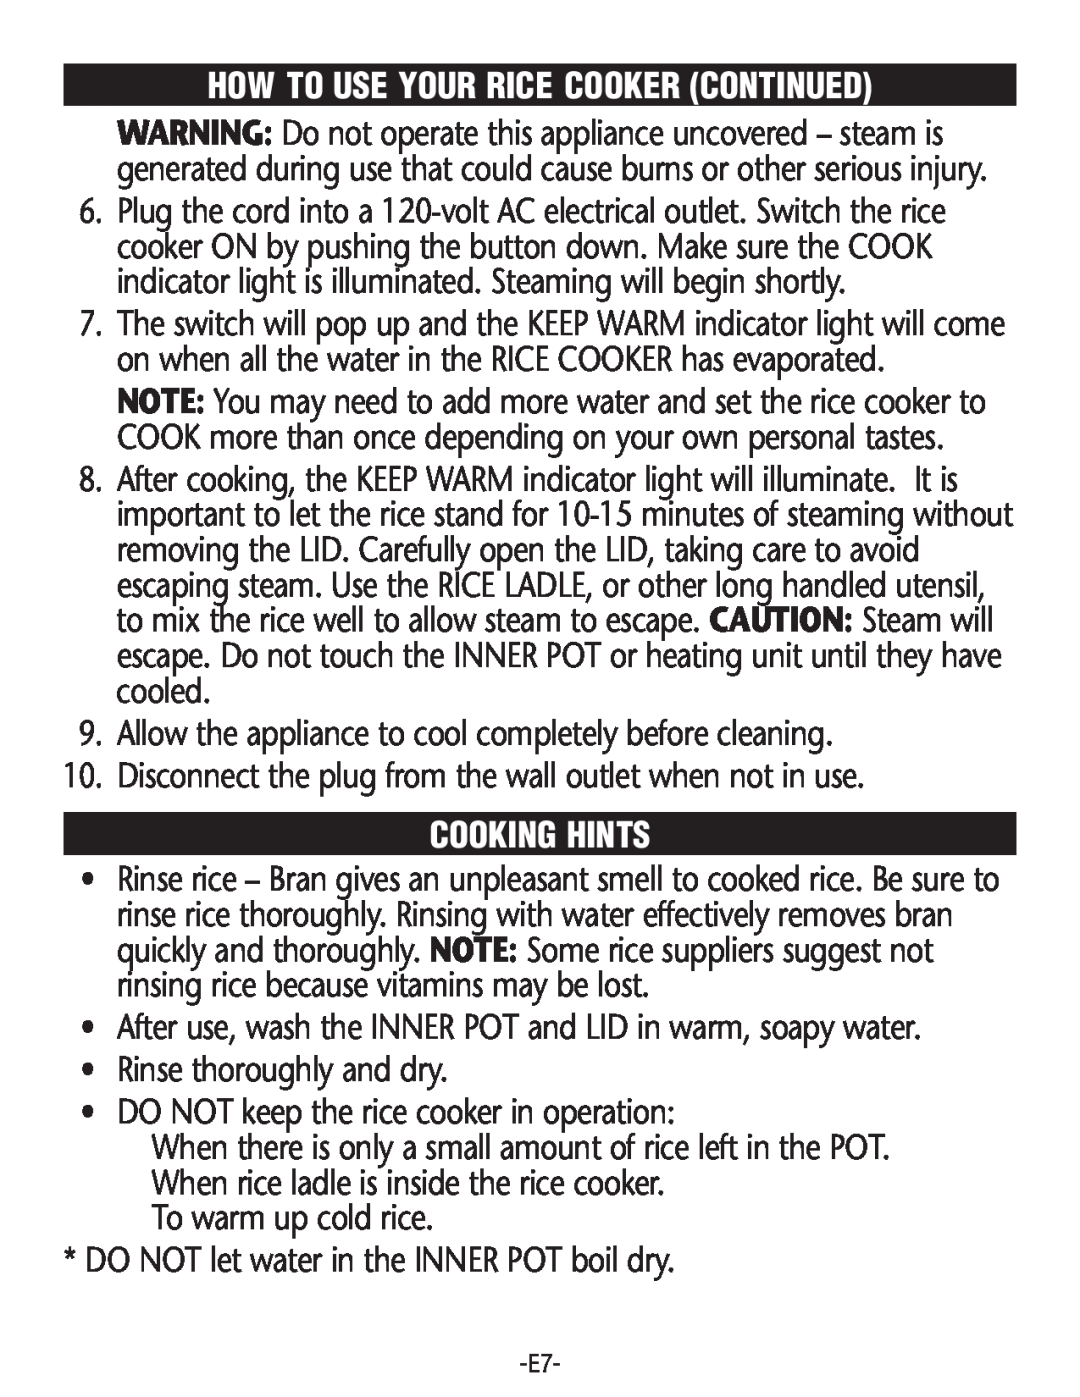 Rival RC101, RC100 How To Use Your Rice Cooker Continued, Cooking Hints, •Rinse thoroughly and dry, To warm up cold rice 